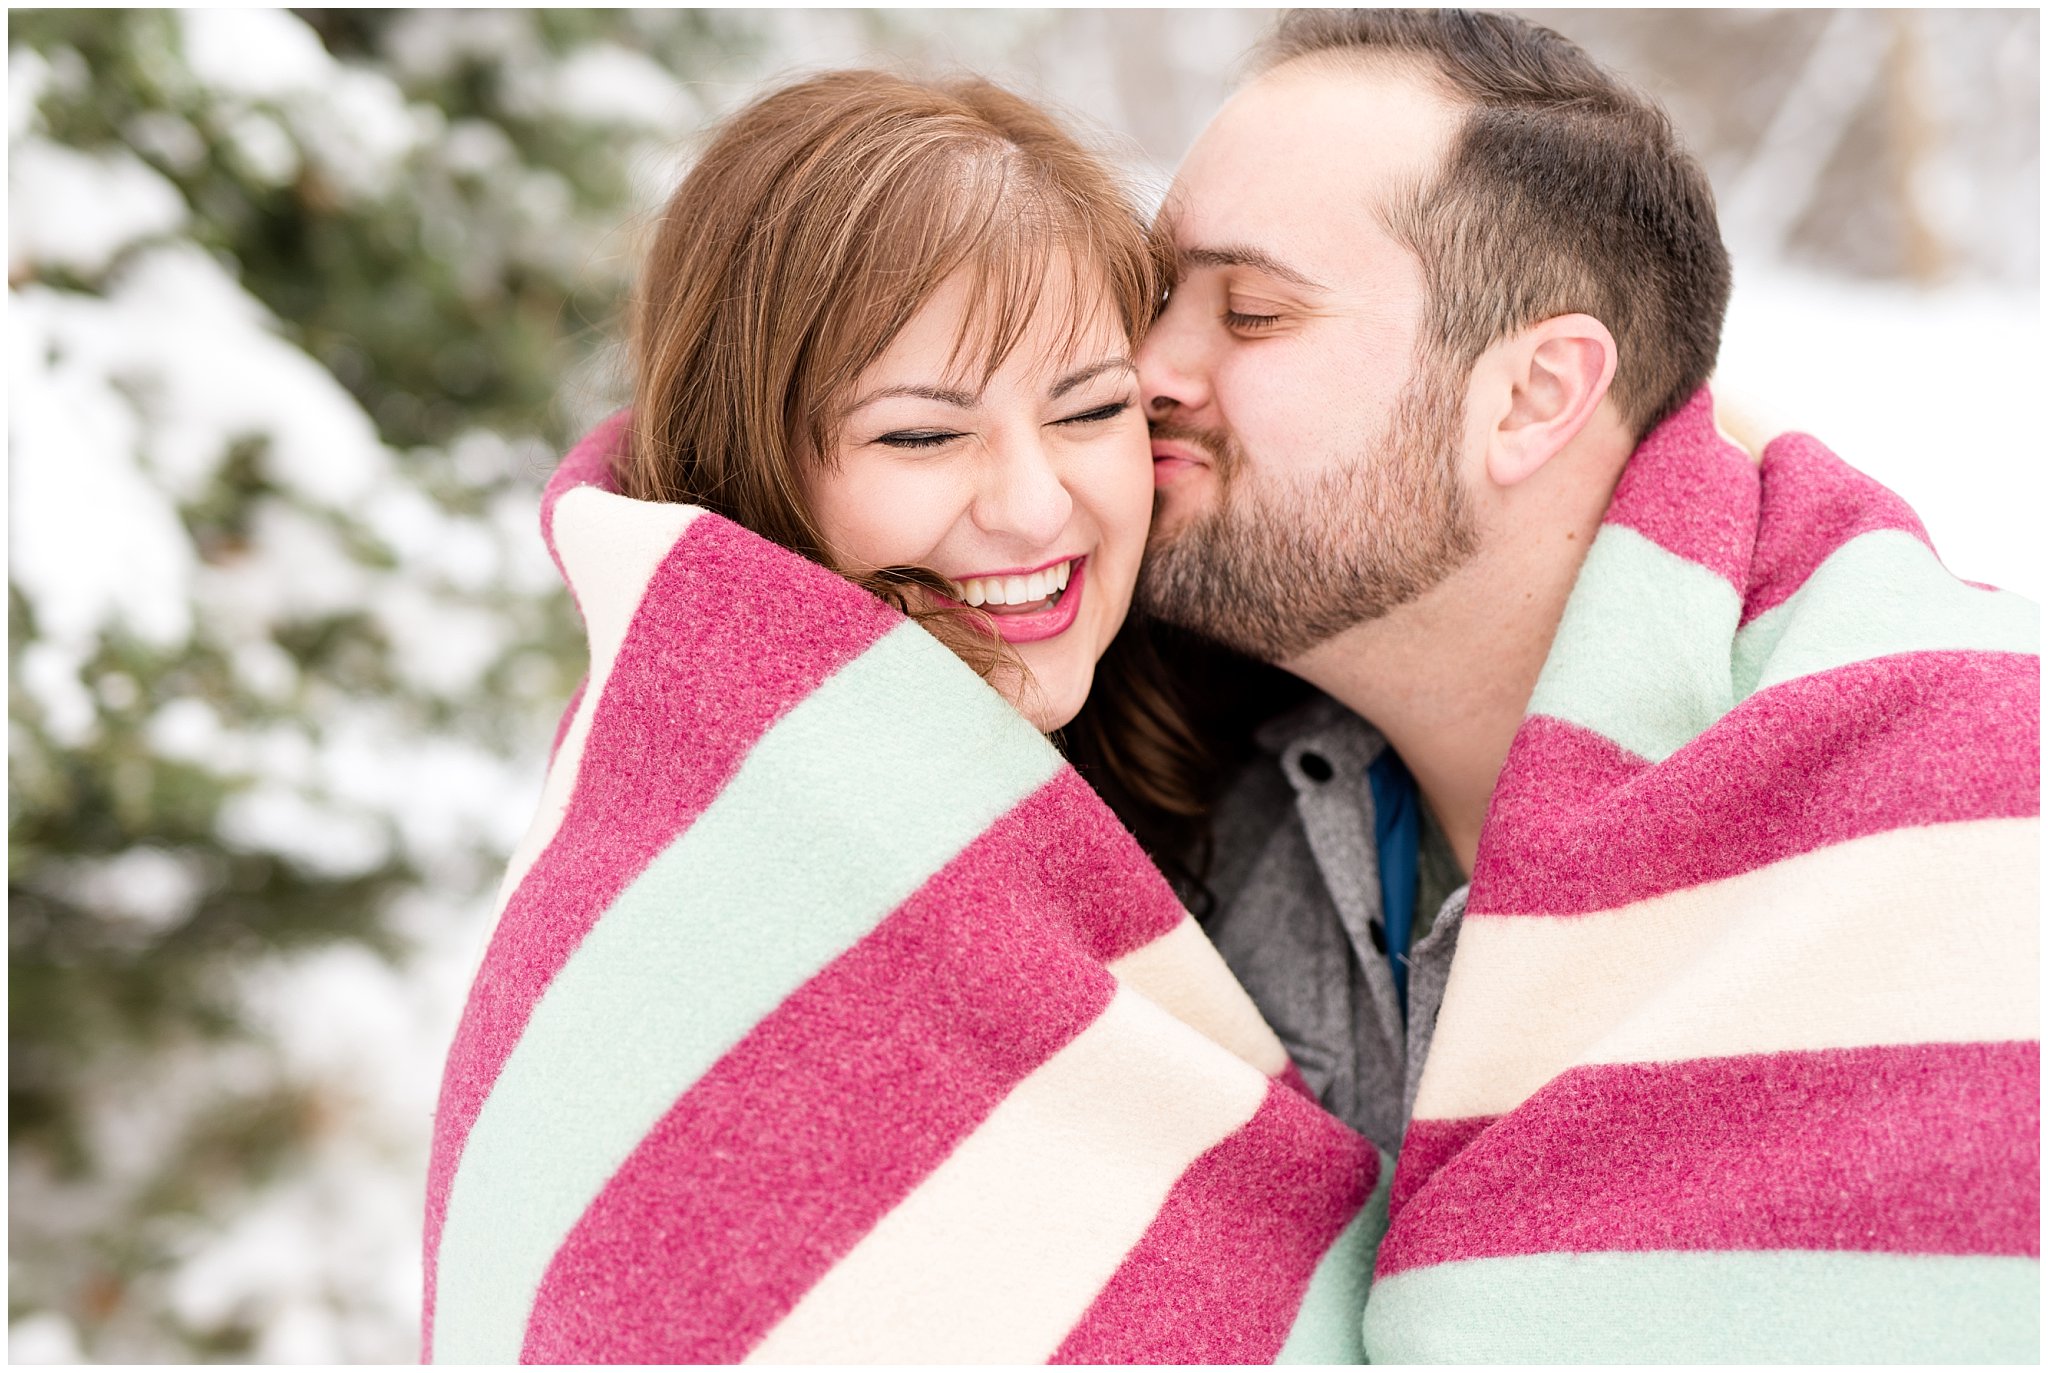 Guy kisses girl on the cheeks while in wrapped in a blanket outdoors | Winter Engagement at Mueller Park and the Utah State Capitol | Jessie and Dallin Photography